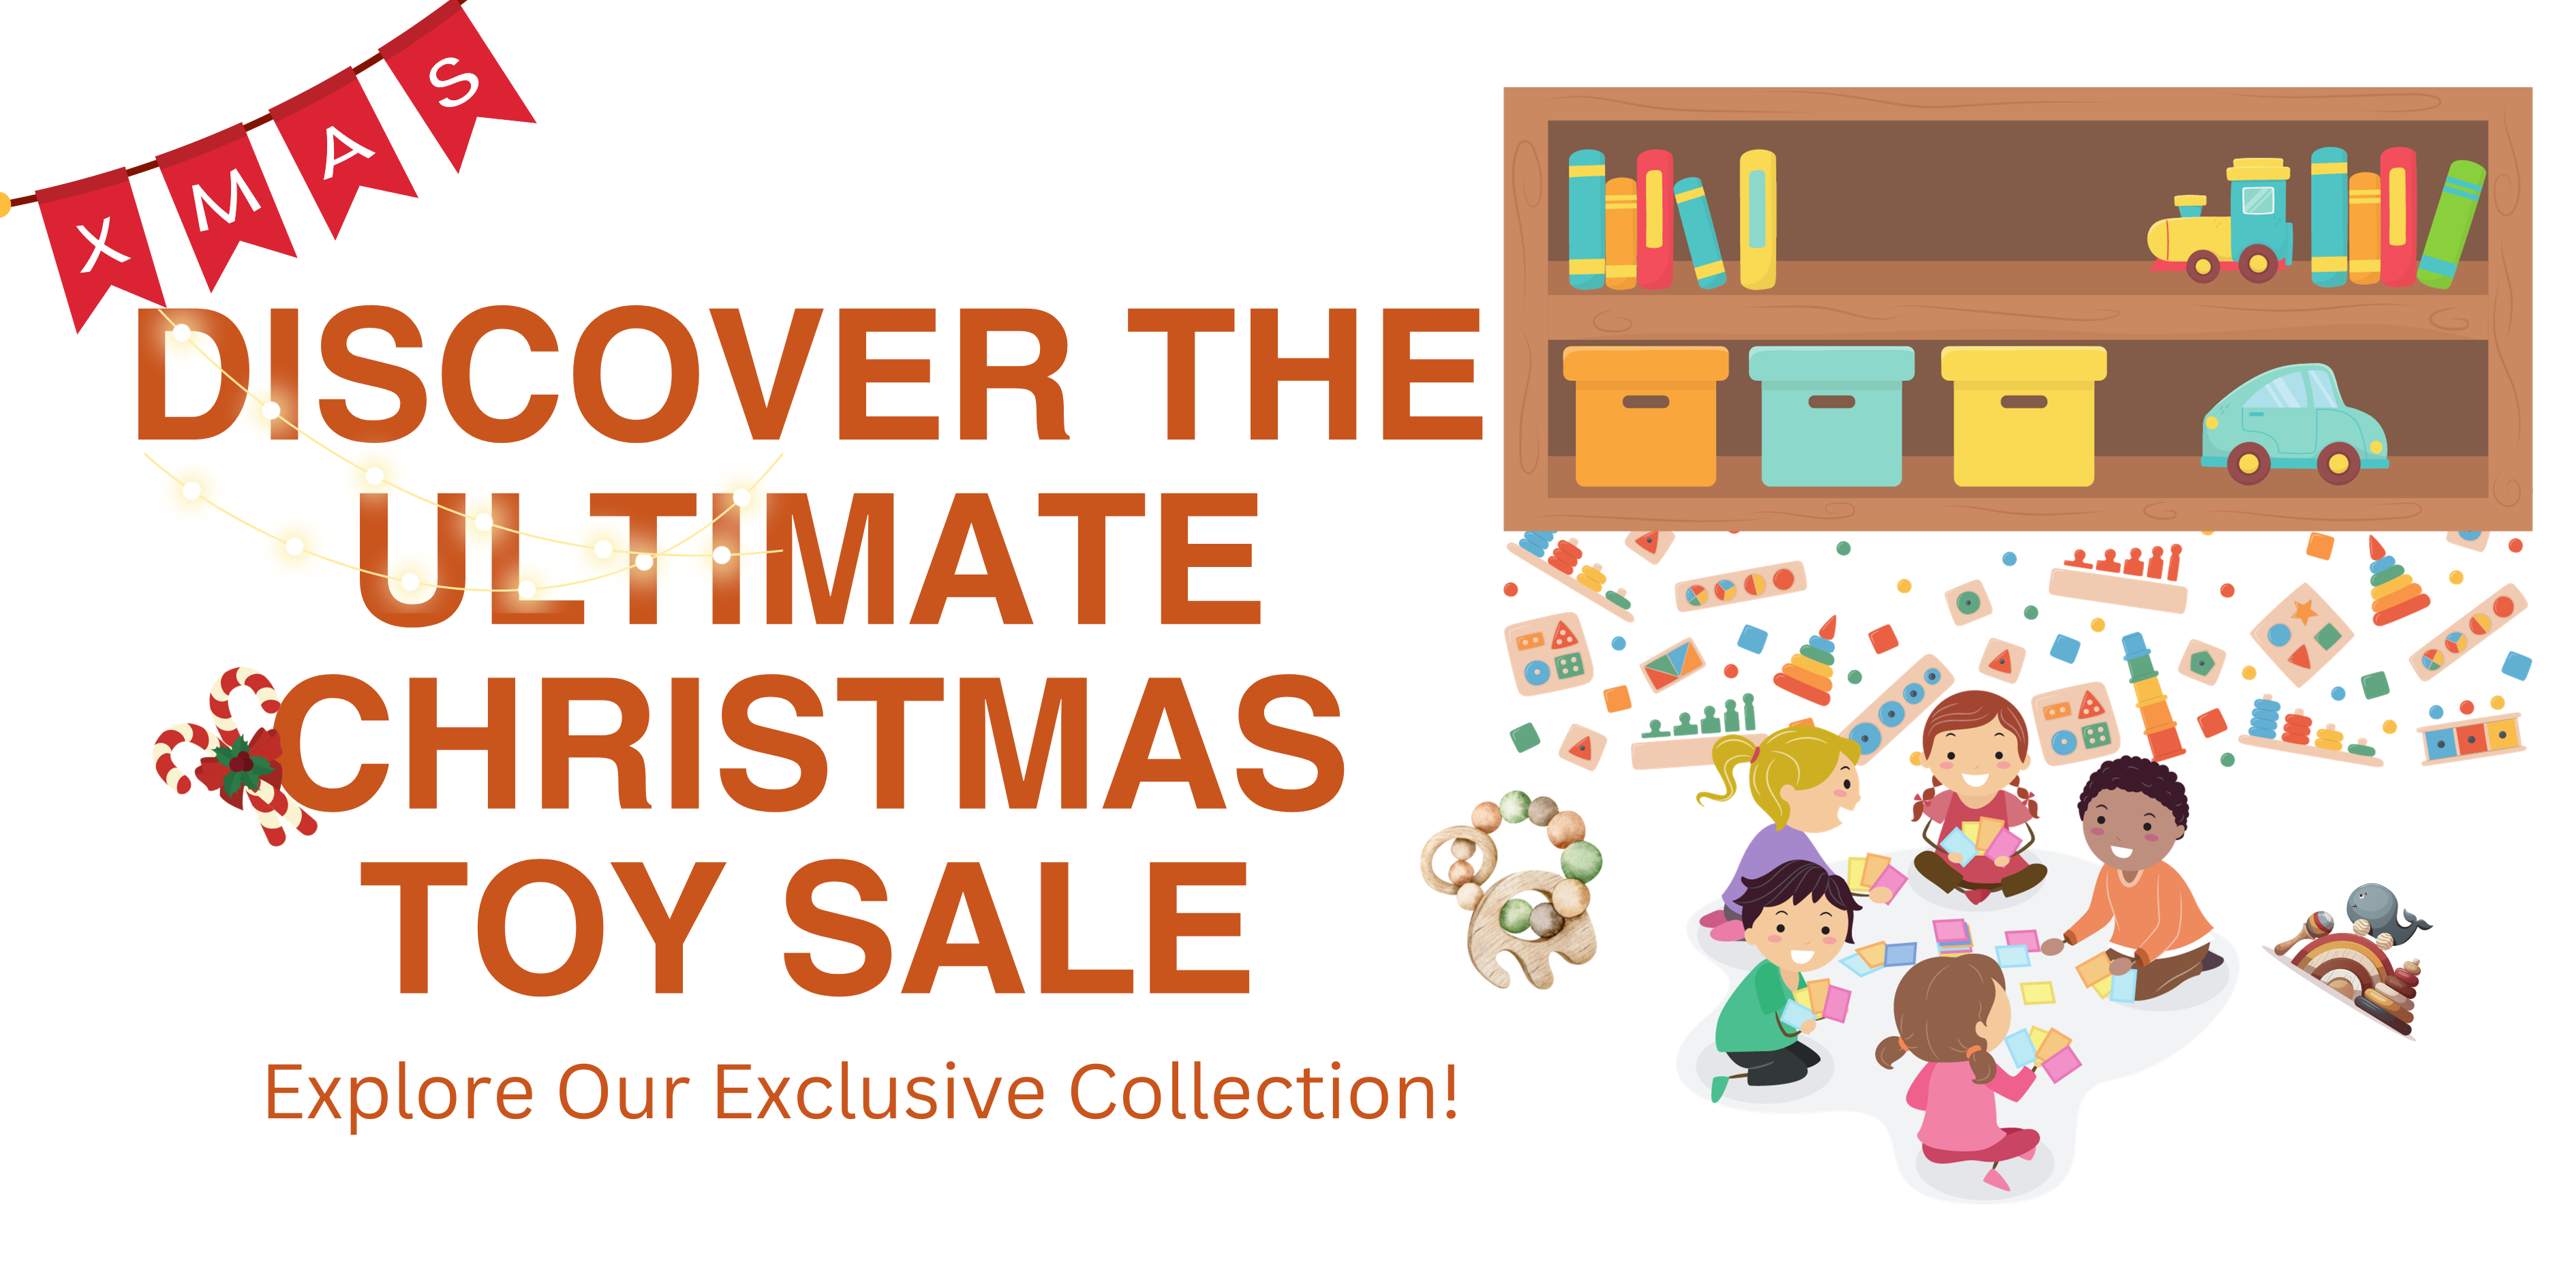 Celebrate Christmas toy sale: Dive into Our Unique Toy Collection!